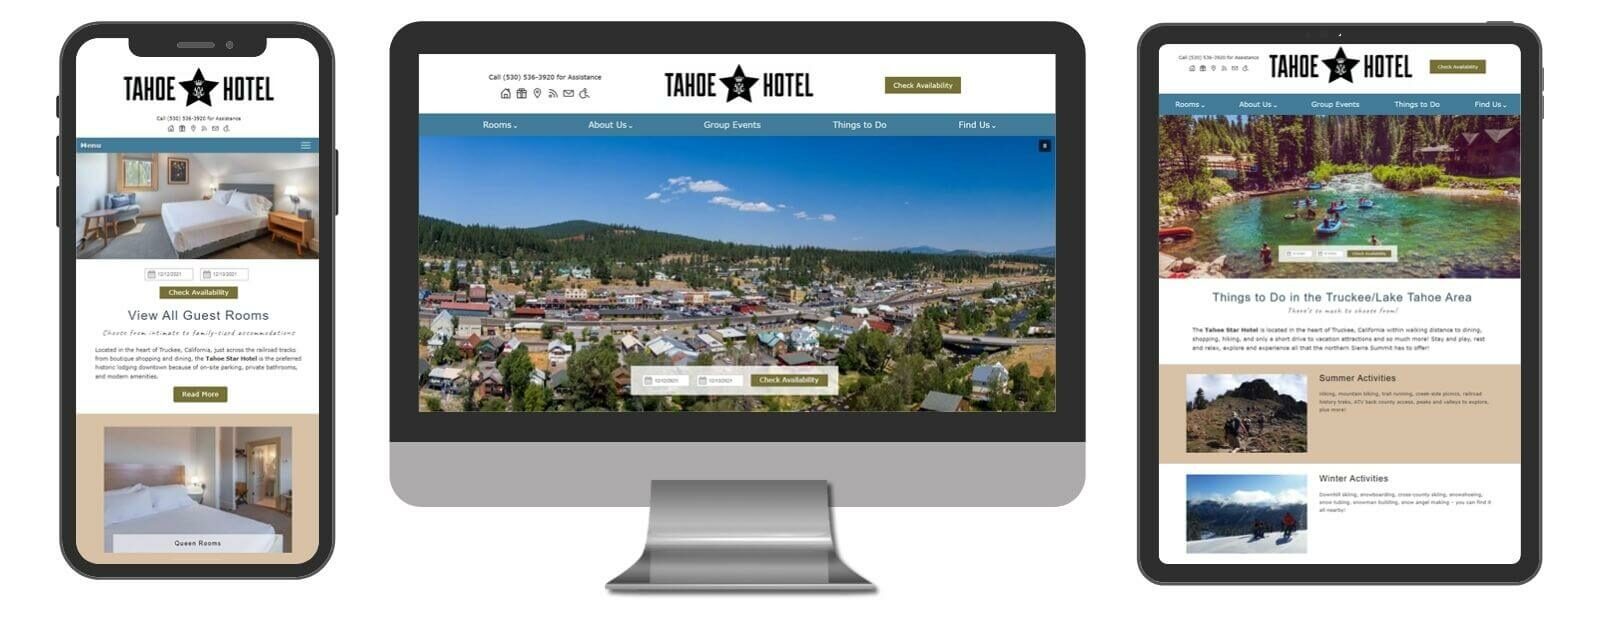 Tahoe Star Hotel website displayed in 3 sizes - mobile, template and desktop